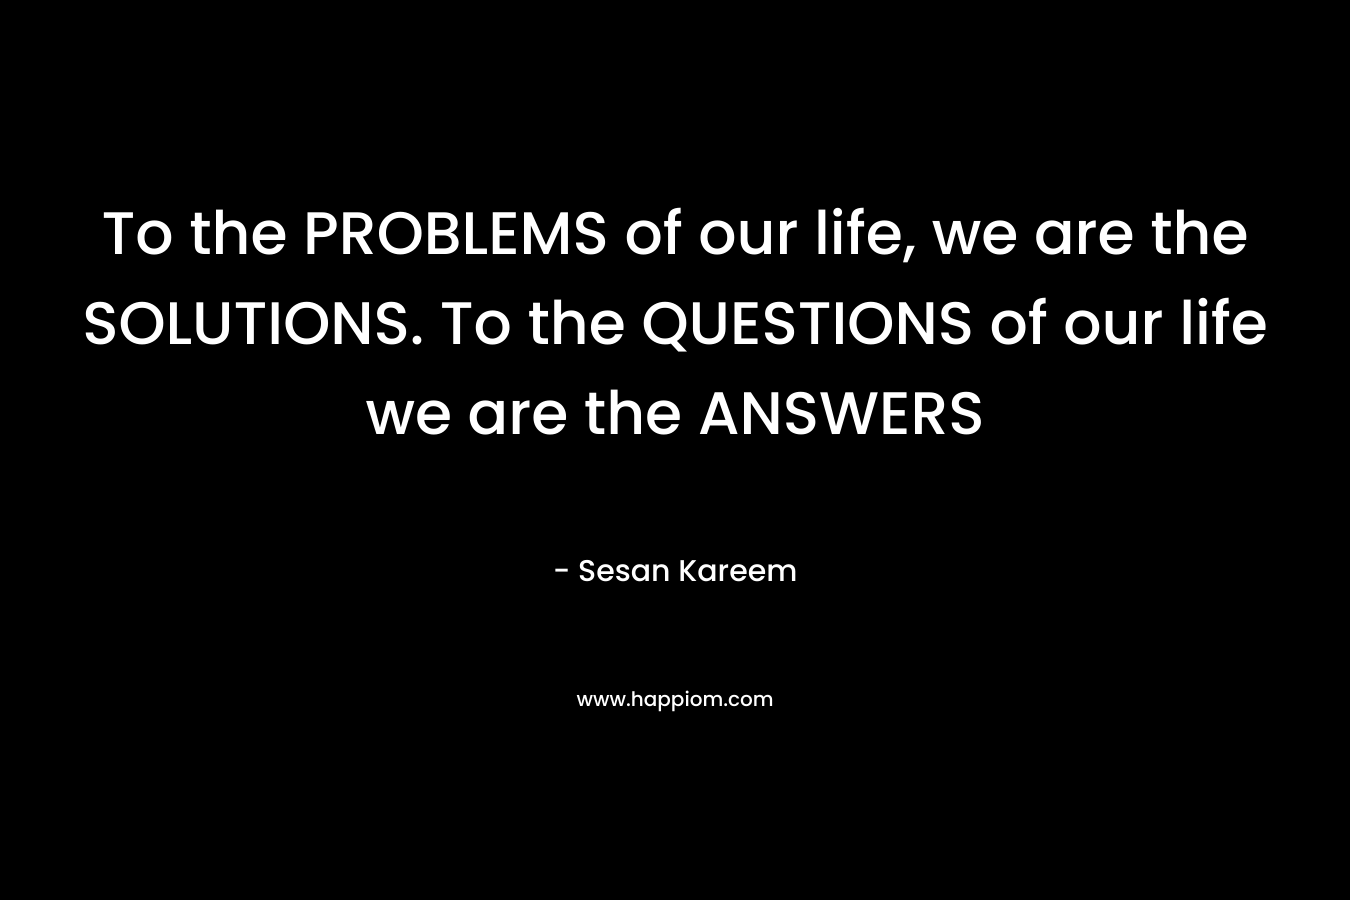 To the PROBLEMS of our life, we are the SOLUTIONS. To the QUESTIONS of our life we are the ANSWERS